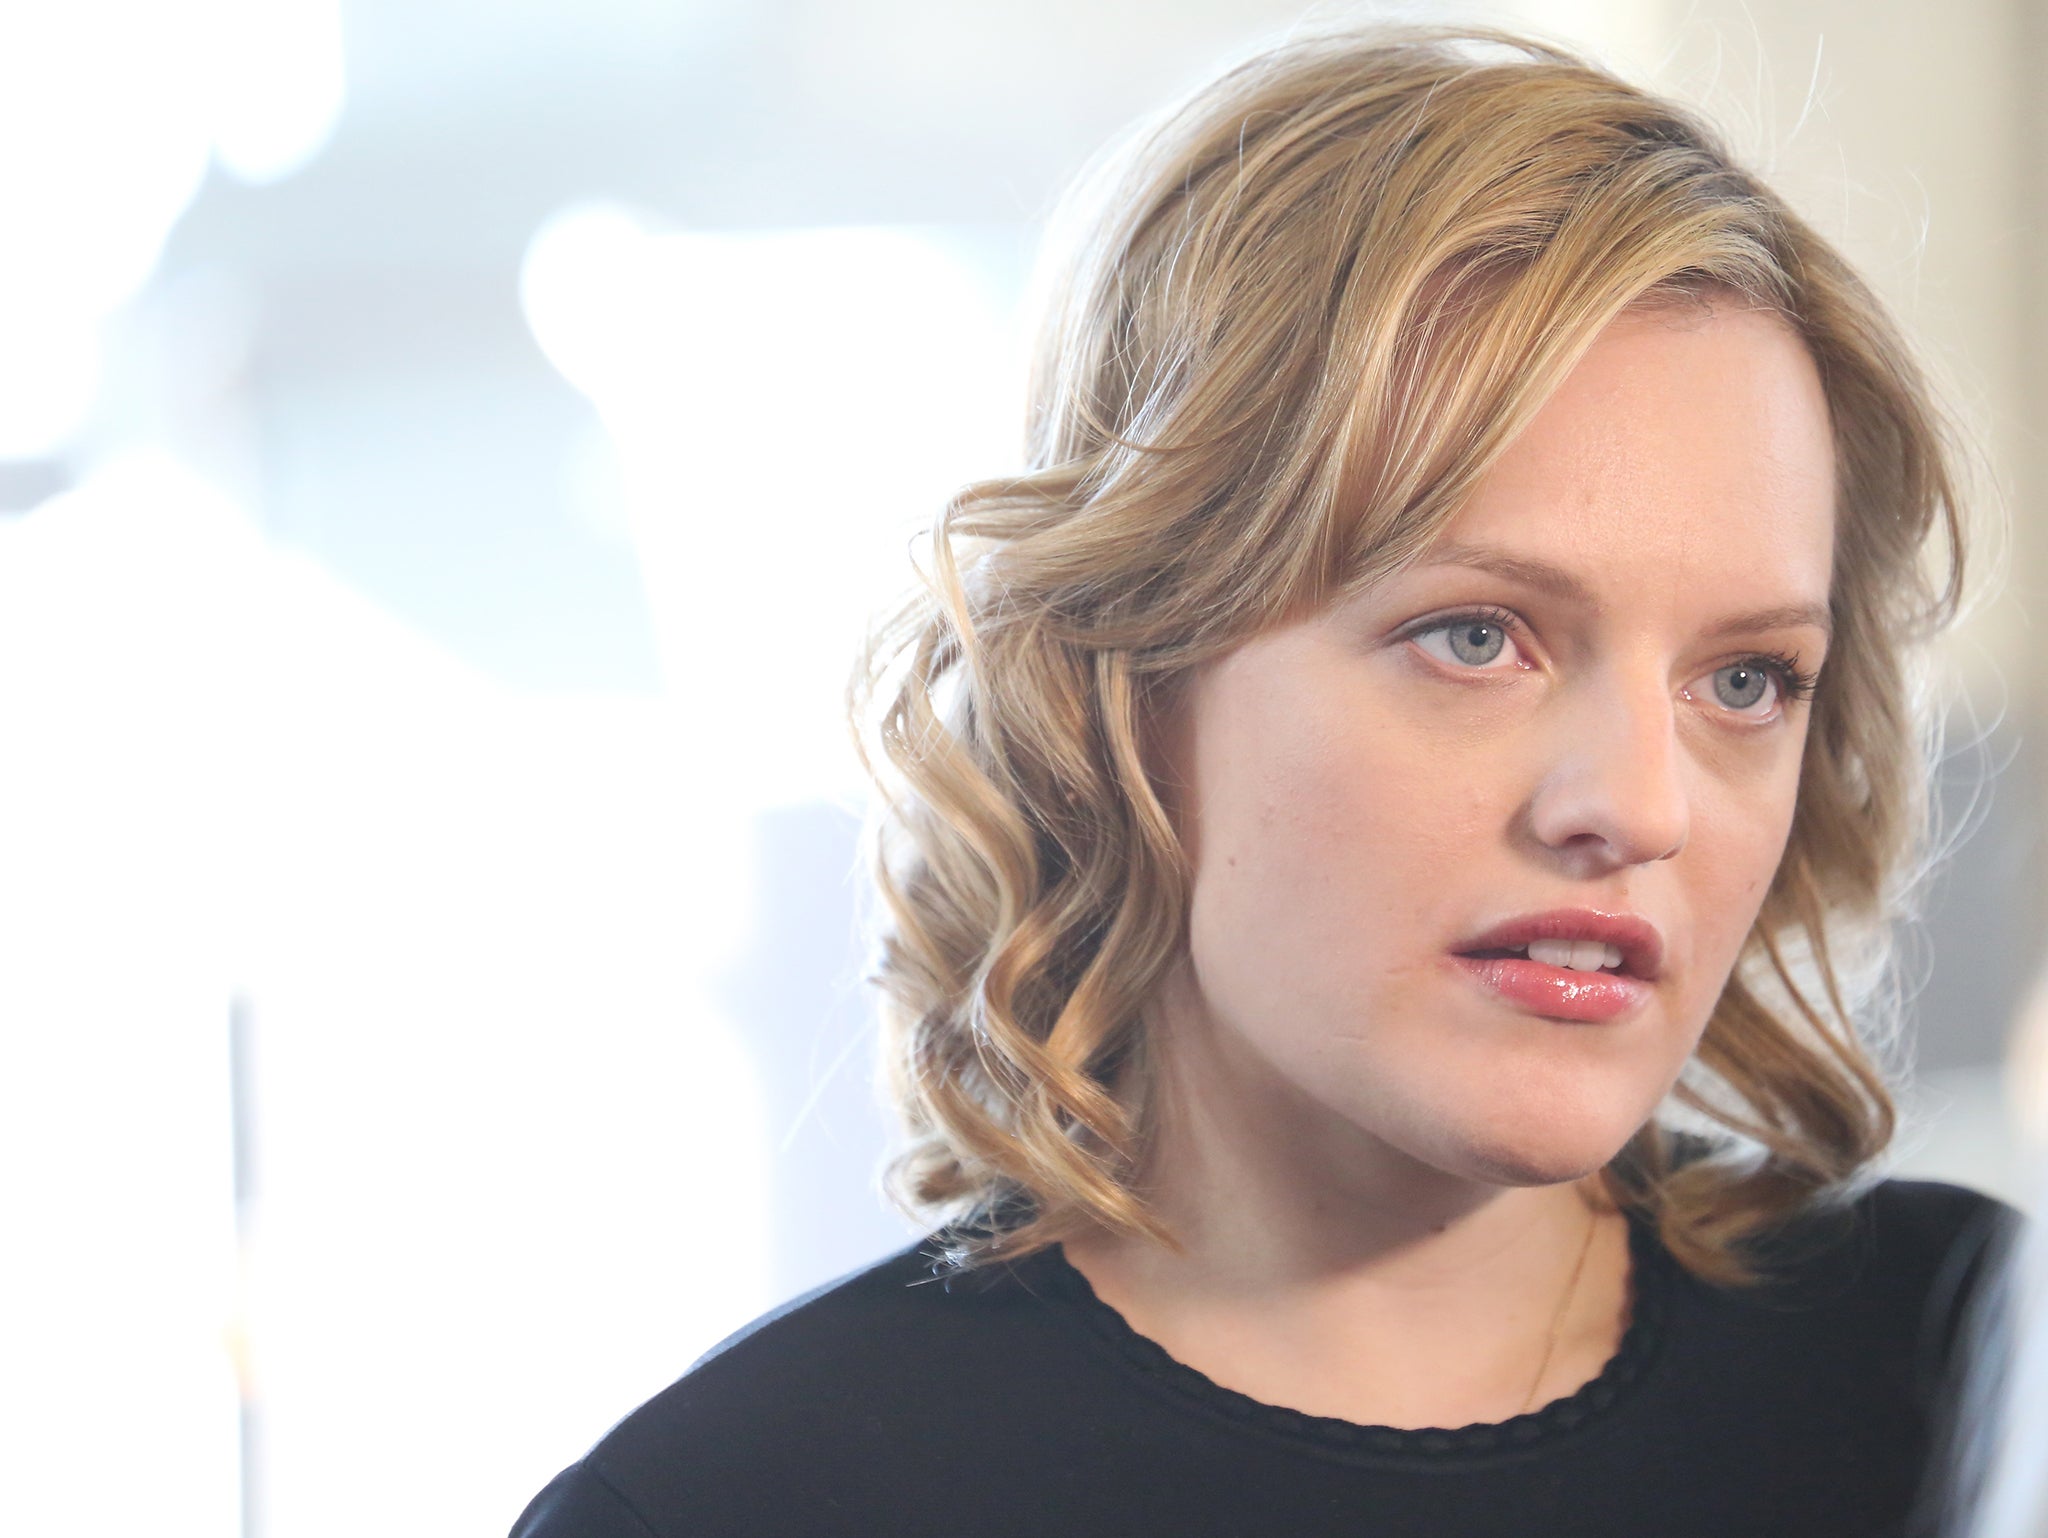 Elisabeth Moss attends the 'The Heidi Chronicles' Media Day at the Baryshinkov Arts Center in New York City